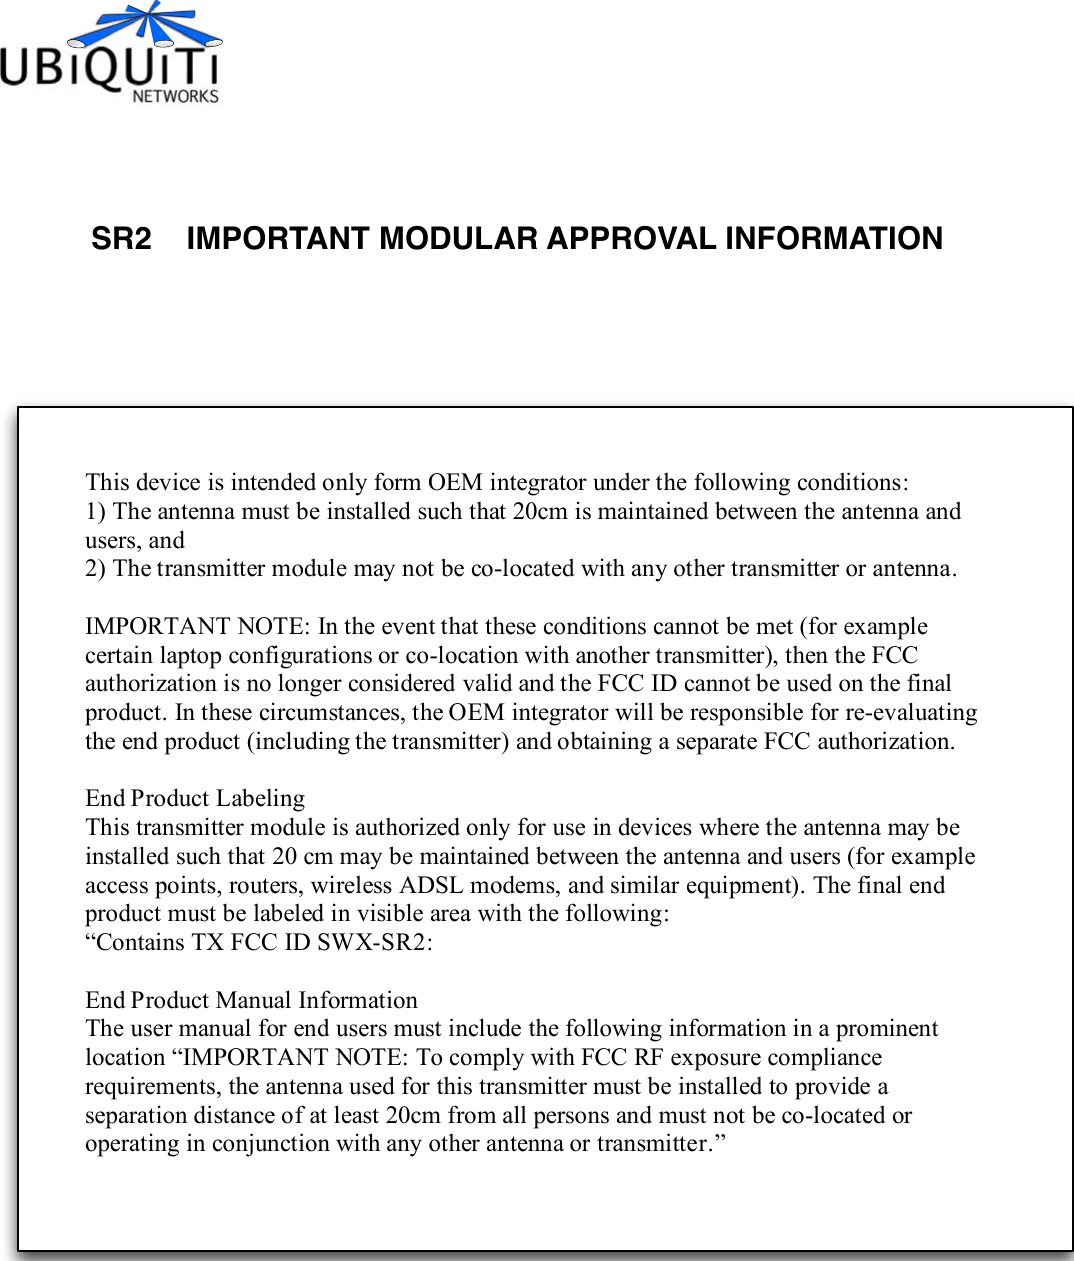 SR2    IMPORTANT MODULAR APPROVAL INFORMATIONThis device is intended only form OEM integrator under the following conditions: 1) The antenna must be installed such that 20cm is maintained between the antenna and users, and 2) The transmitter module may not be co-located with any other transmitter or antenna.  IMPORTANT NOTE: In the event that these conditions cannot be met (for example certain laptop configurations or co-location with another transmitter), then the FCC authorization is no longer considered valid and the FCC ID cannot be used on the final product. In these circumstances, the OEM integrator will be responsible for re-evaluating the end product (including the transmitter) and obtaining a separate FCC authorization.  End Product Labeling This transmitter module is authorized only for use in devices where the antenna may be installed such that 20 cm may be maintained between the antenna and users (for example access points, routers, wireless ADSL modems, and similar equipment). The final end product must be labeled in visible area with the following: “Contains TX FCC ID SWX-SR2:    End Product Manual Information The user manual for end users must include the following information in a prominent location “IMPORTANT NOTE: To comply with FCC RF exposure compliance requirements, the antenna used for this transmitter must be installed to provide a separation distance of at least 20cm from all persons and must not be co-located or operating in conjunction with any other antenna or transmitter.” 